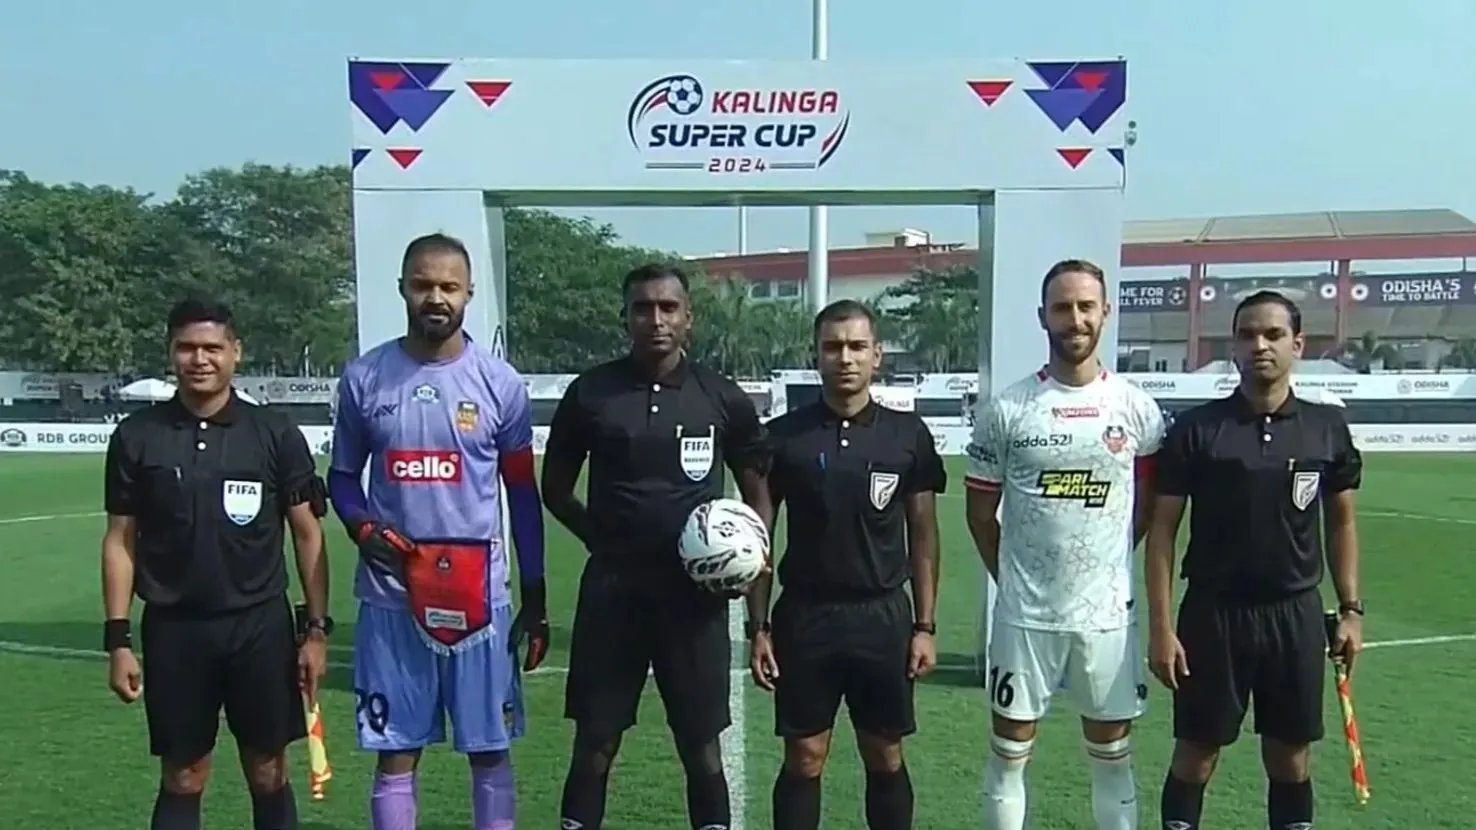 Kalinga Super Cup 2024: The captains of both teams exchange greetings, holding their respective team flags  Image - X